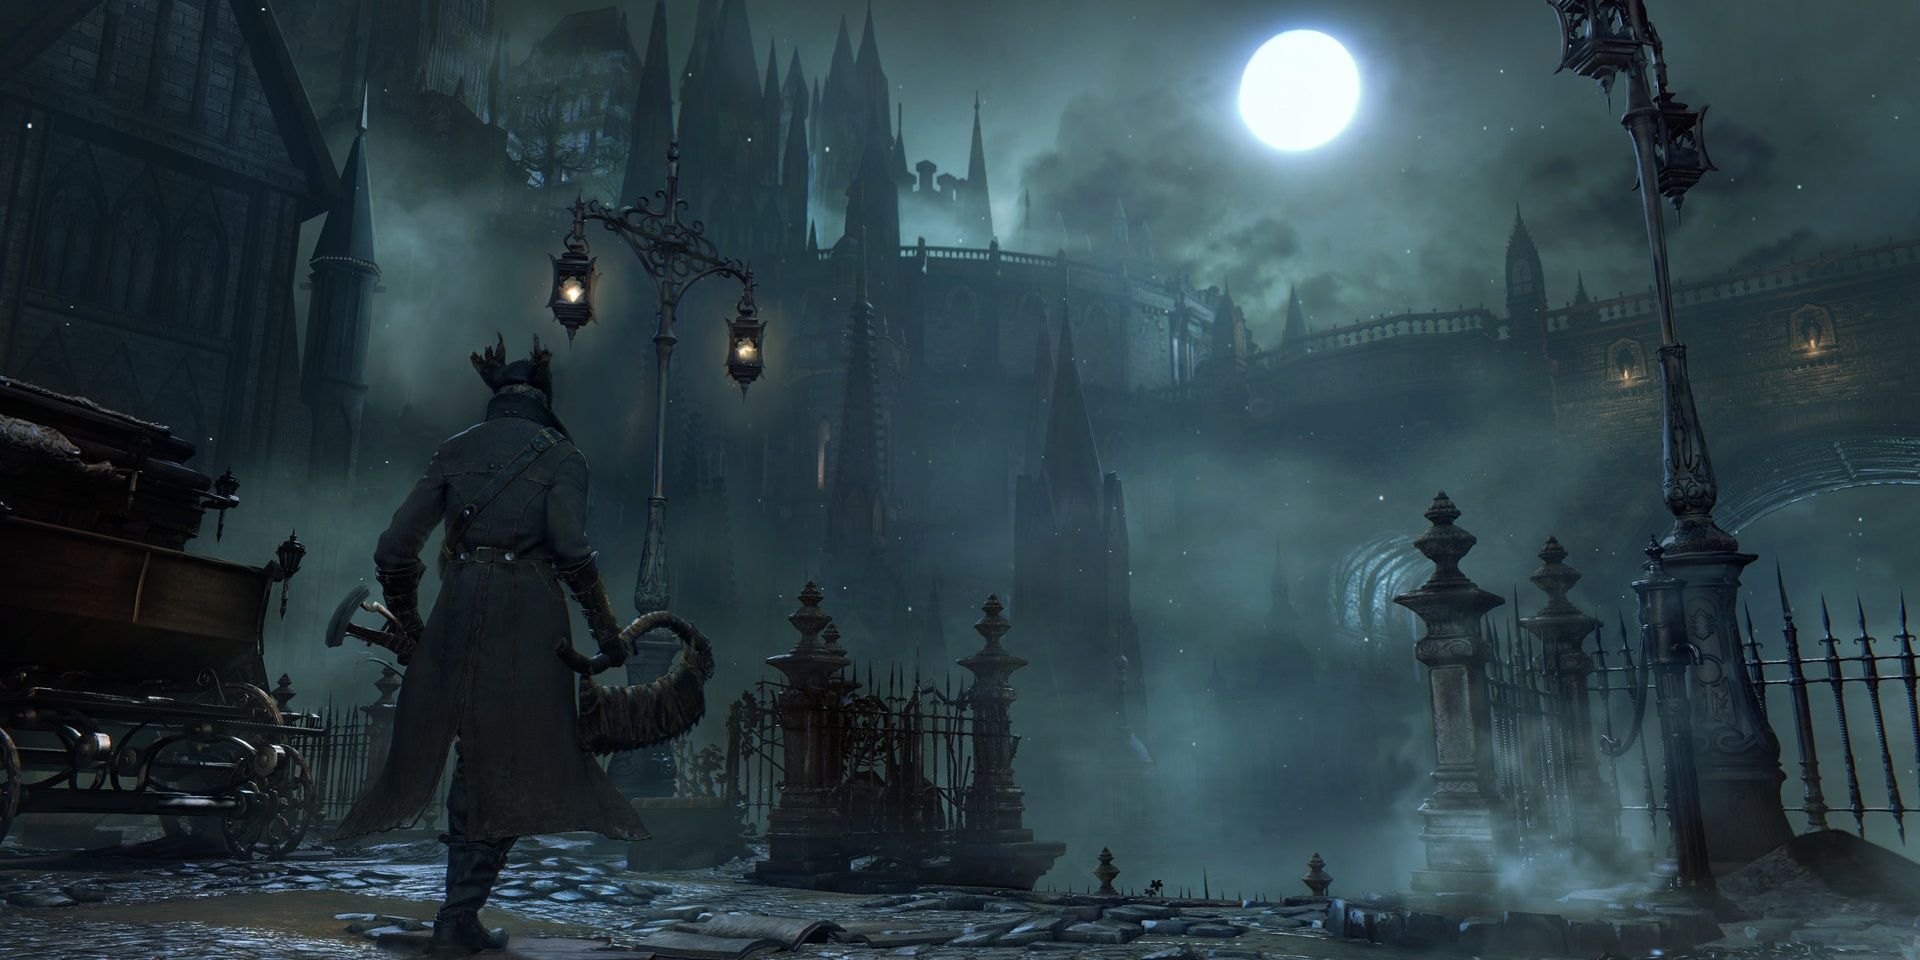 The Hunter gazes at the moon in Central Yharnam.